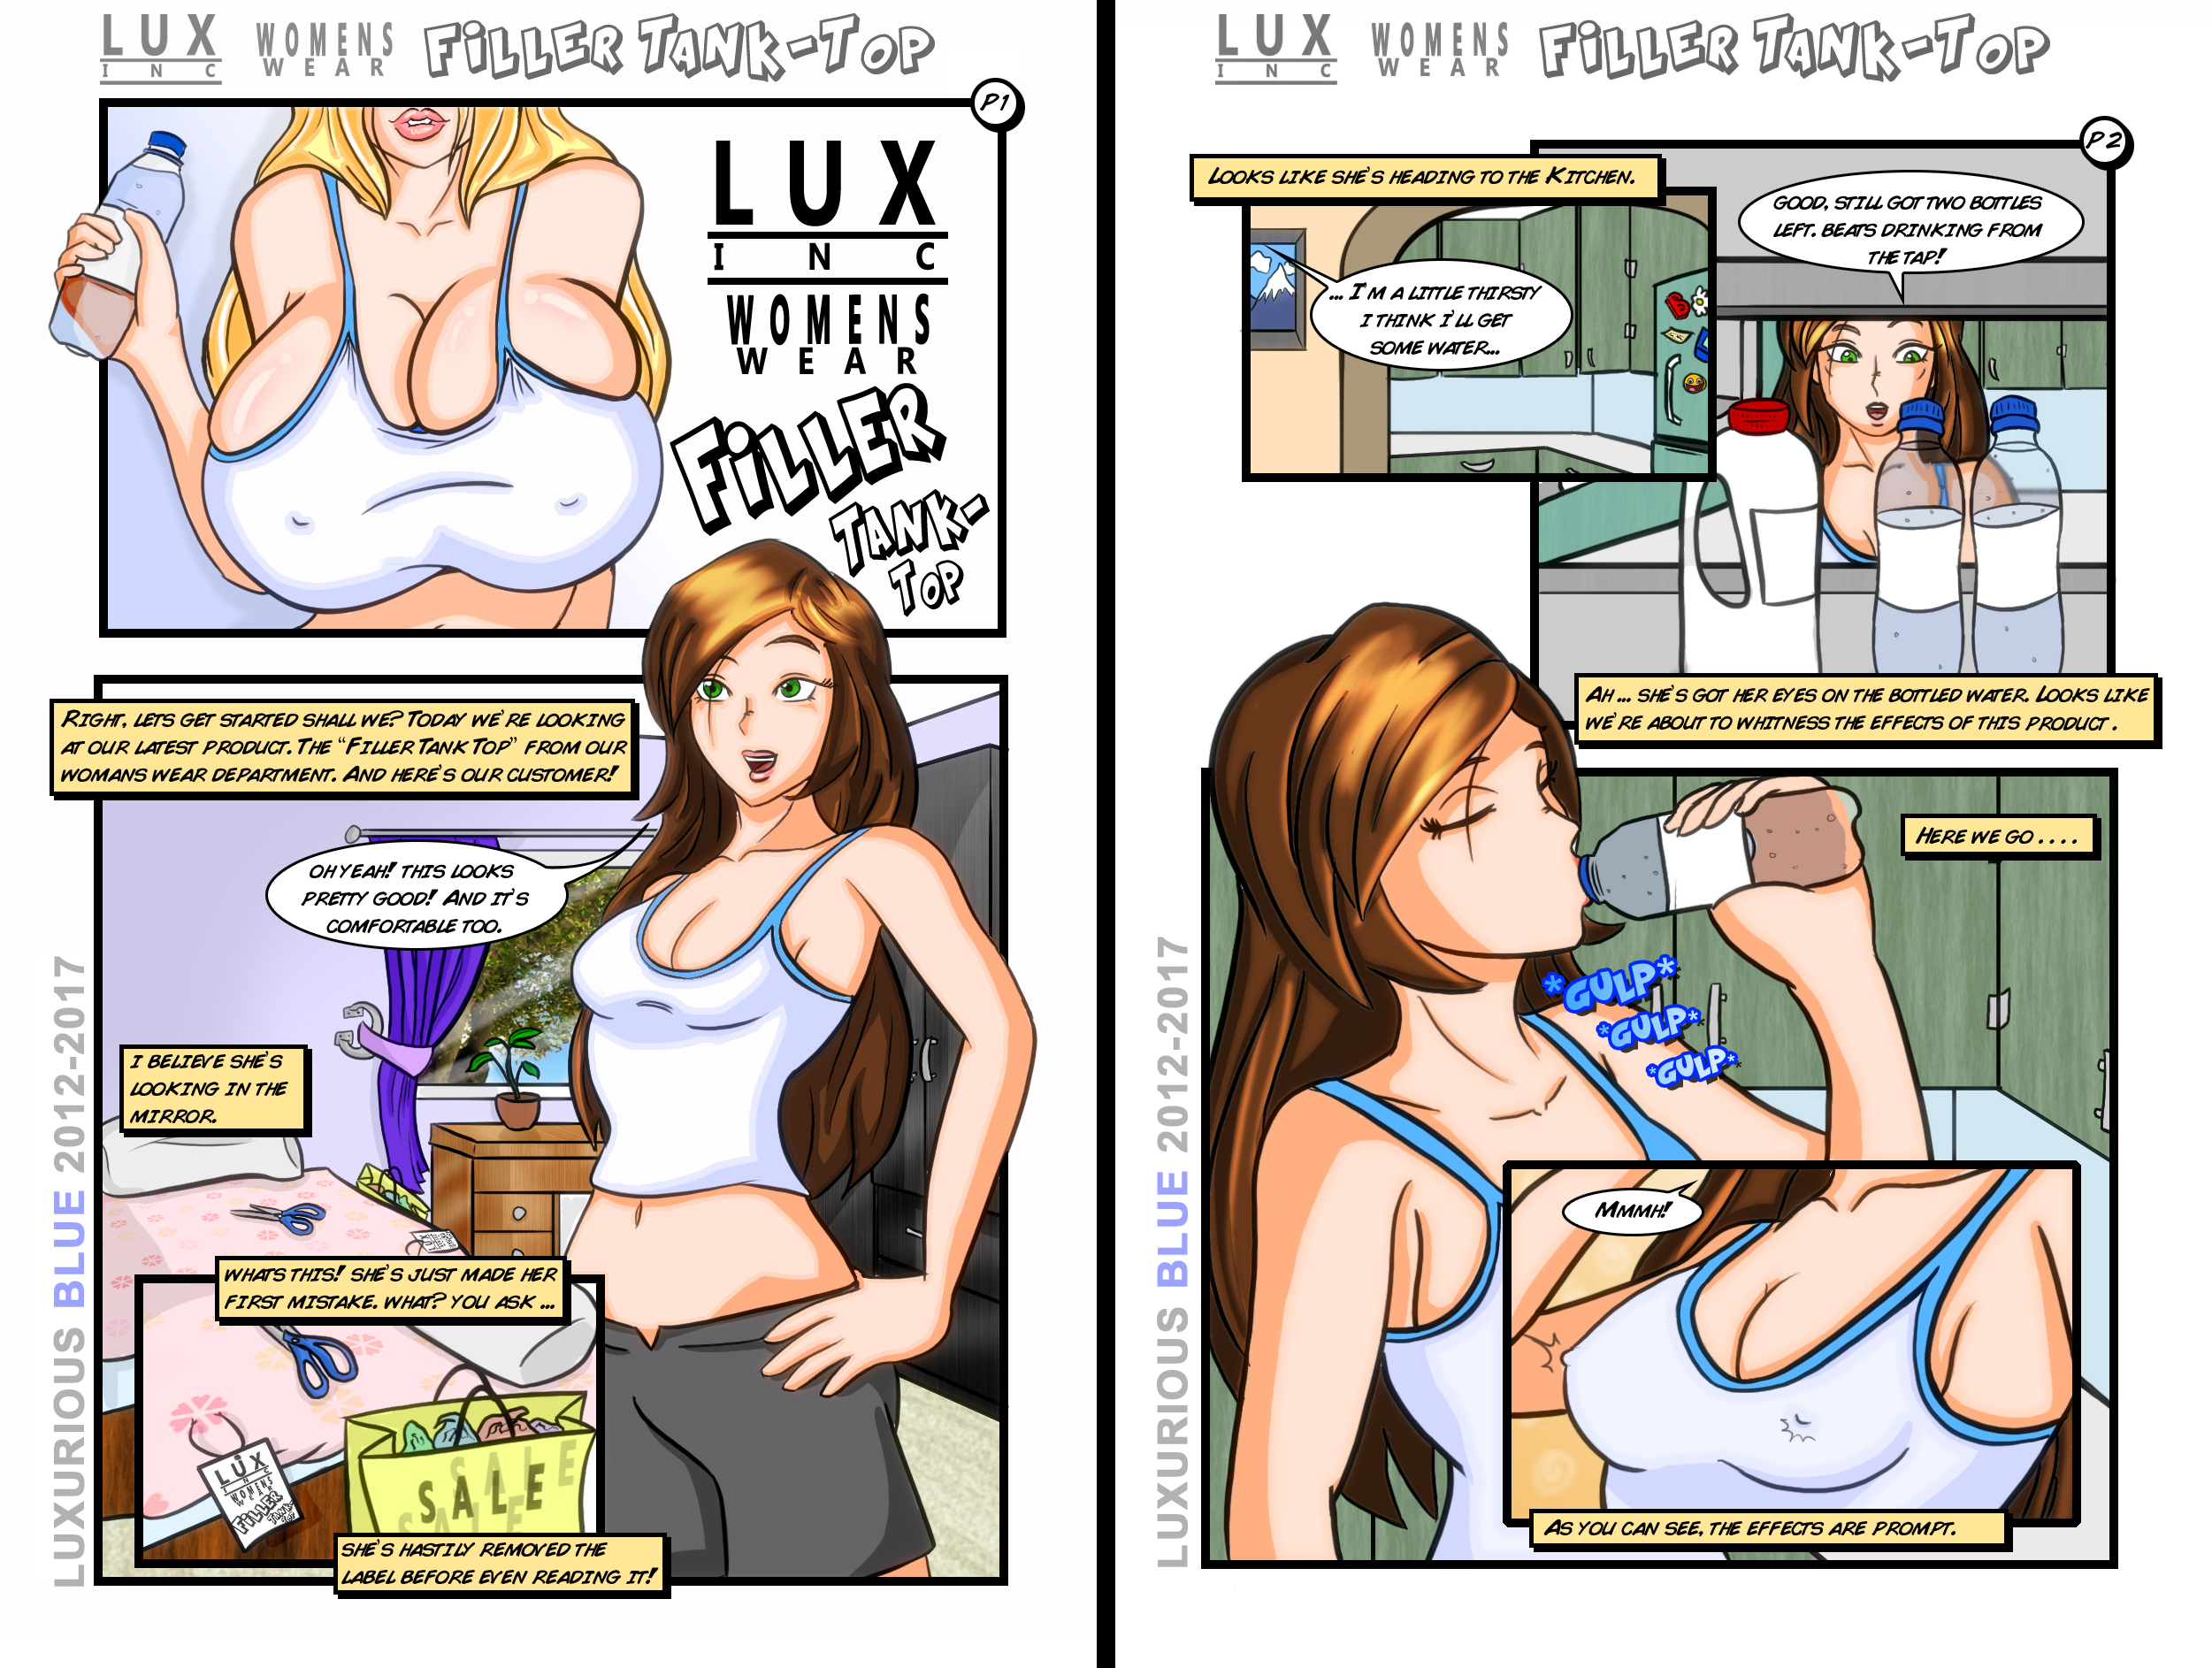 filler_tank_top_pages_1_2_2012_by_luxurious_blue_dbjjco7.jpg